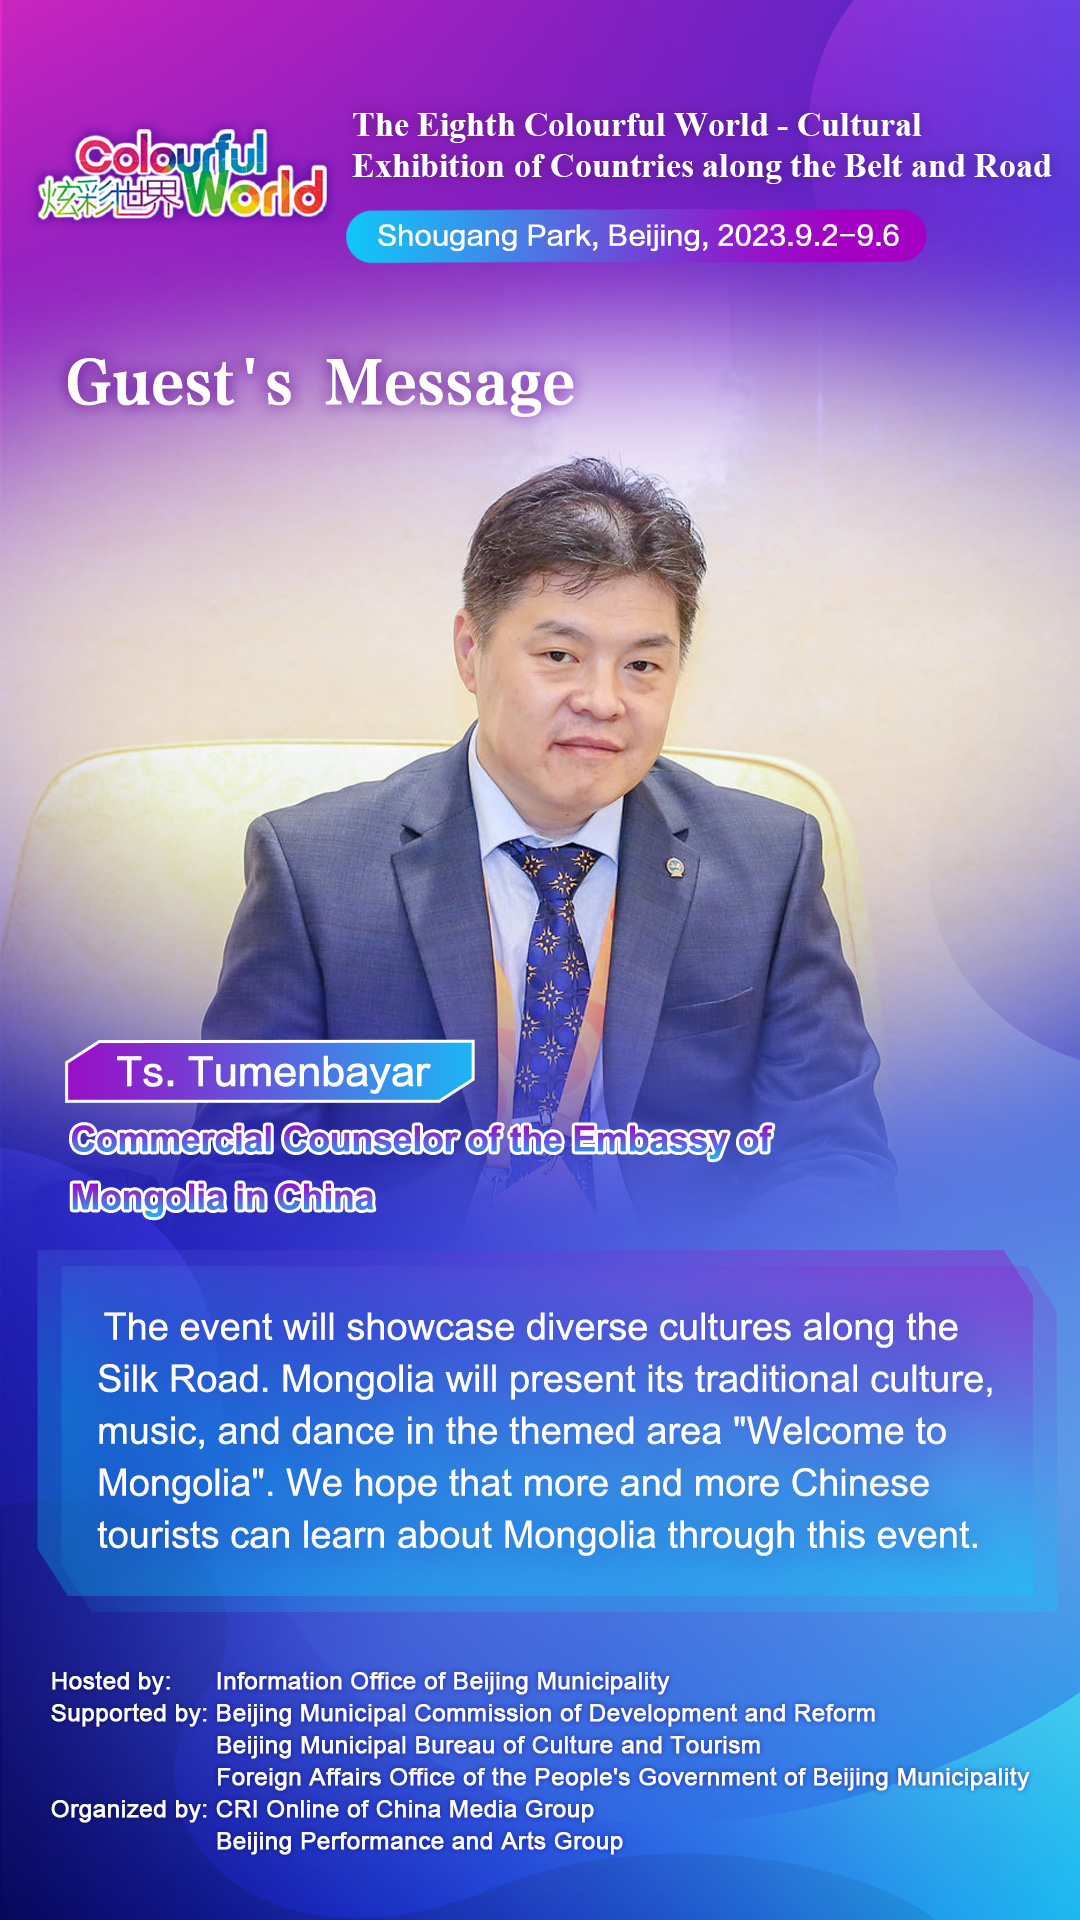 Guest’s Message - Ts. Tumenbayar, Commercial Counselor of the Embassy of Mongolia in China_fororder_第八屆“炫彩世界”-金句海報-English-蒙古(1)